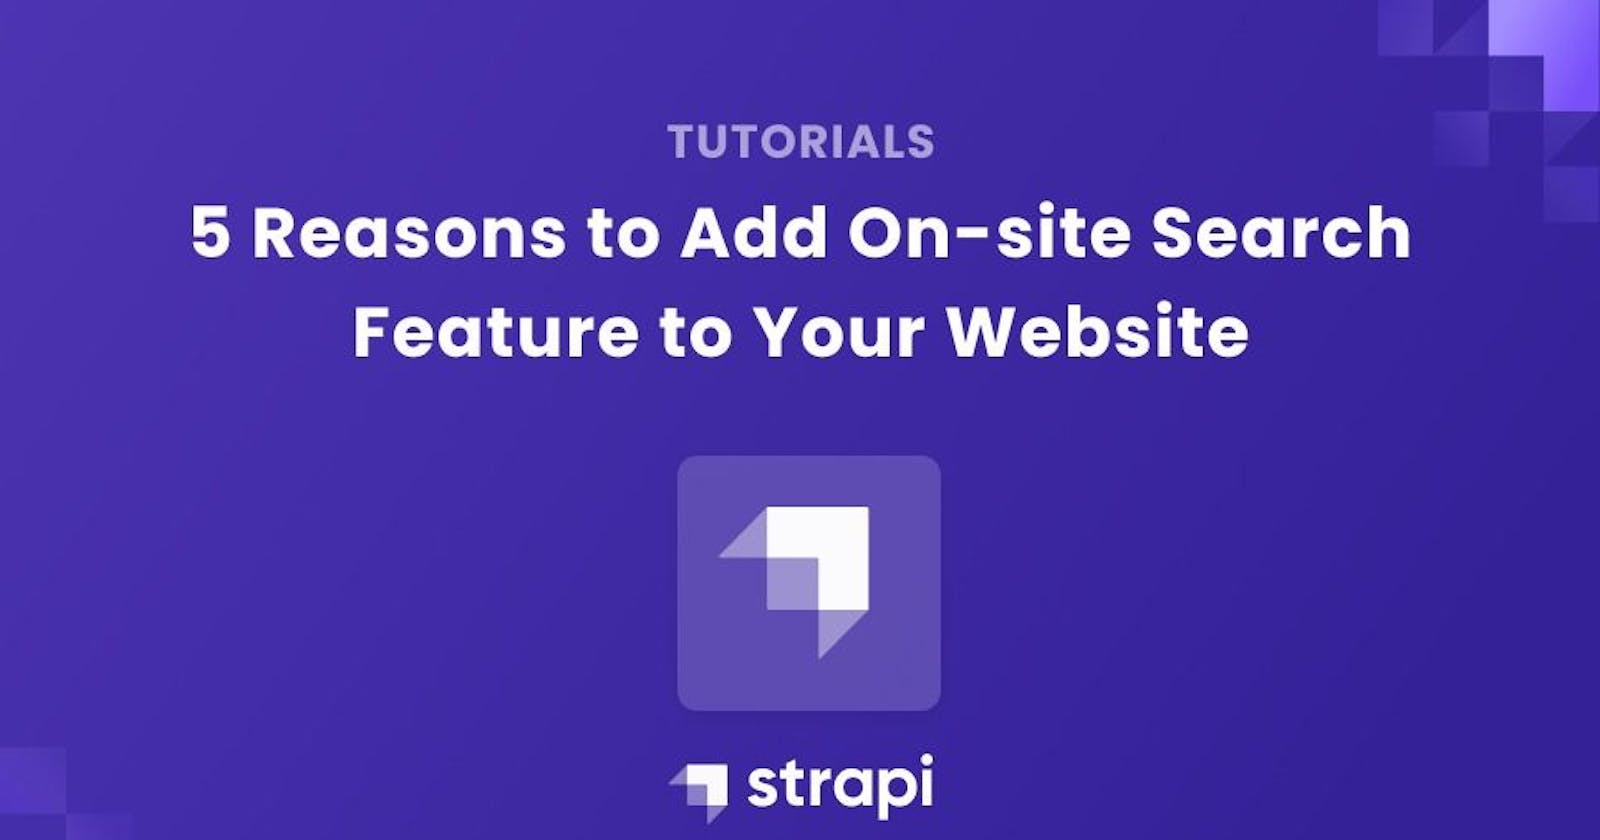 Here are 5 Reasons to Add On-Site Search to Your Website